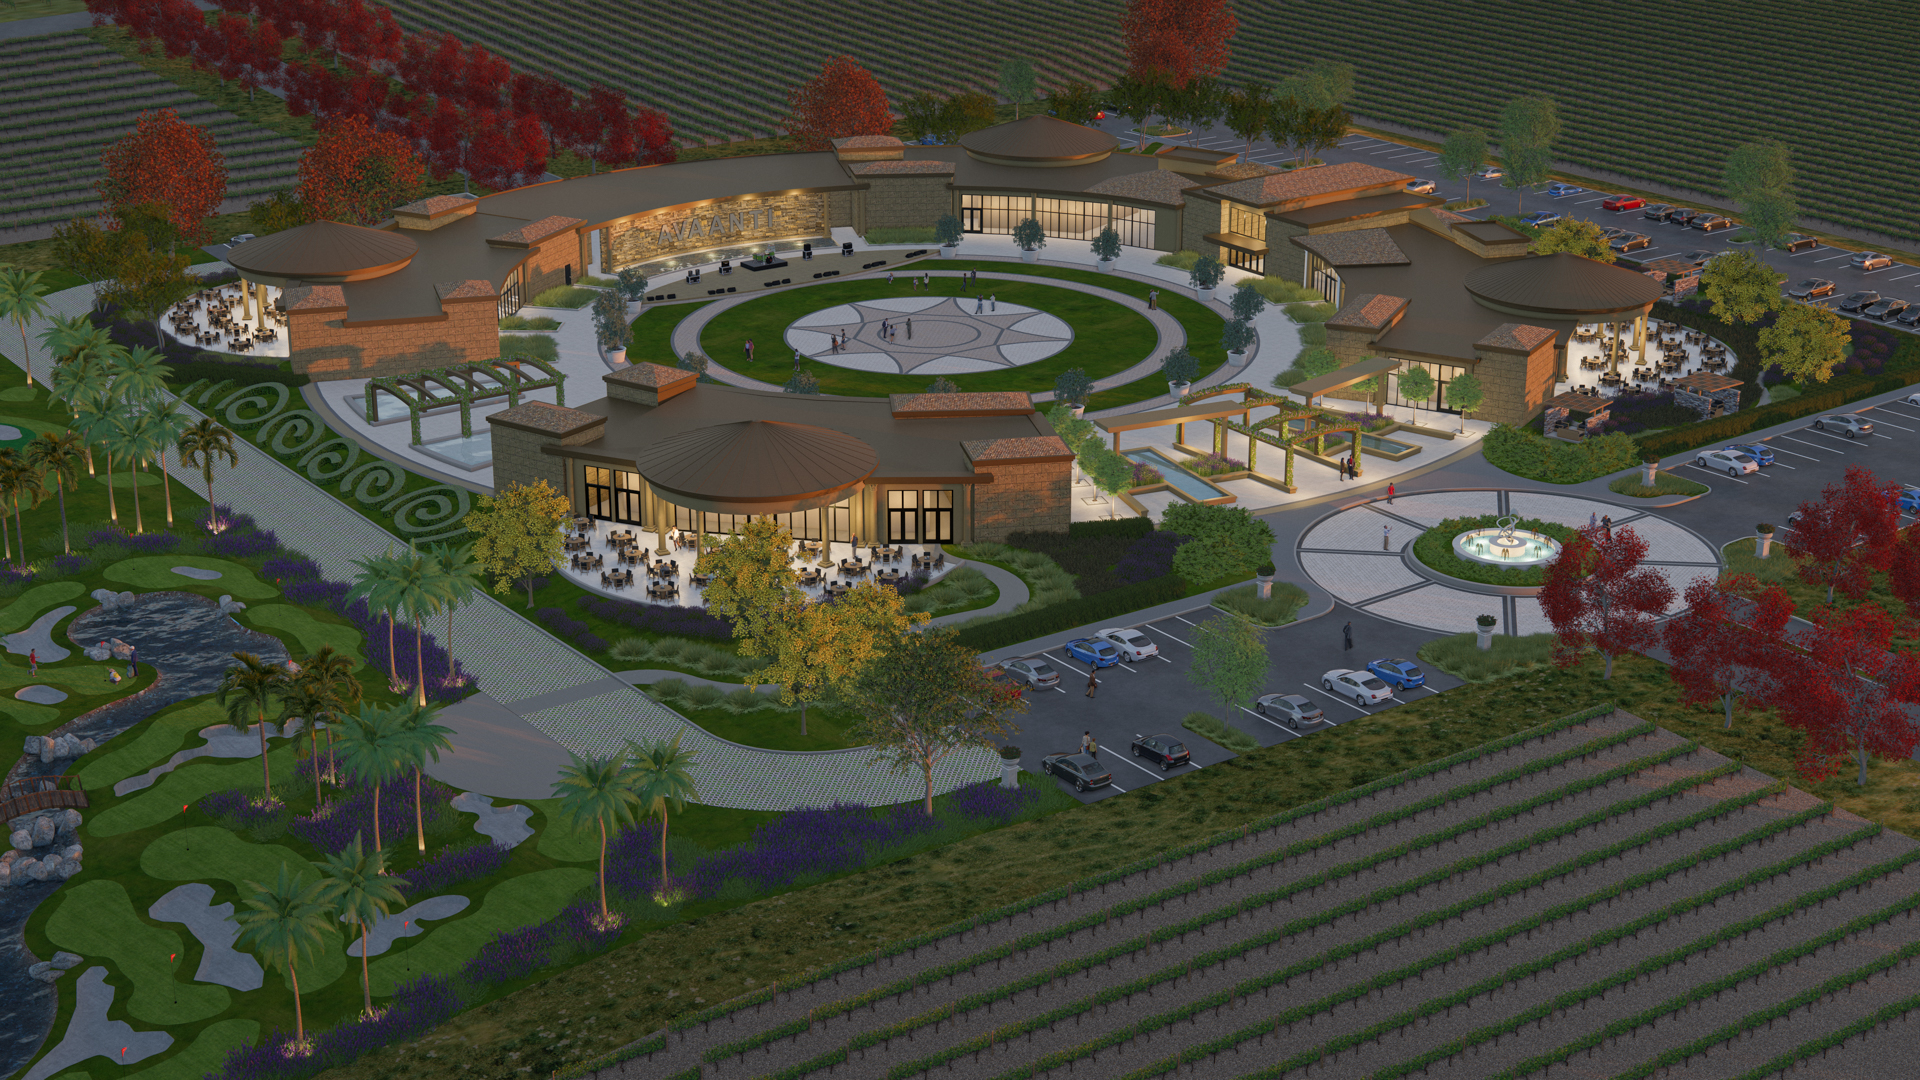 Avaanti Vineyard Event Center and Residence - Commercial - Commercial 7942-AvaantiVineyard-EventCenter-and-AvaantiVineyard-Residence-dv5-dusk-2K.jpg